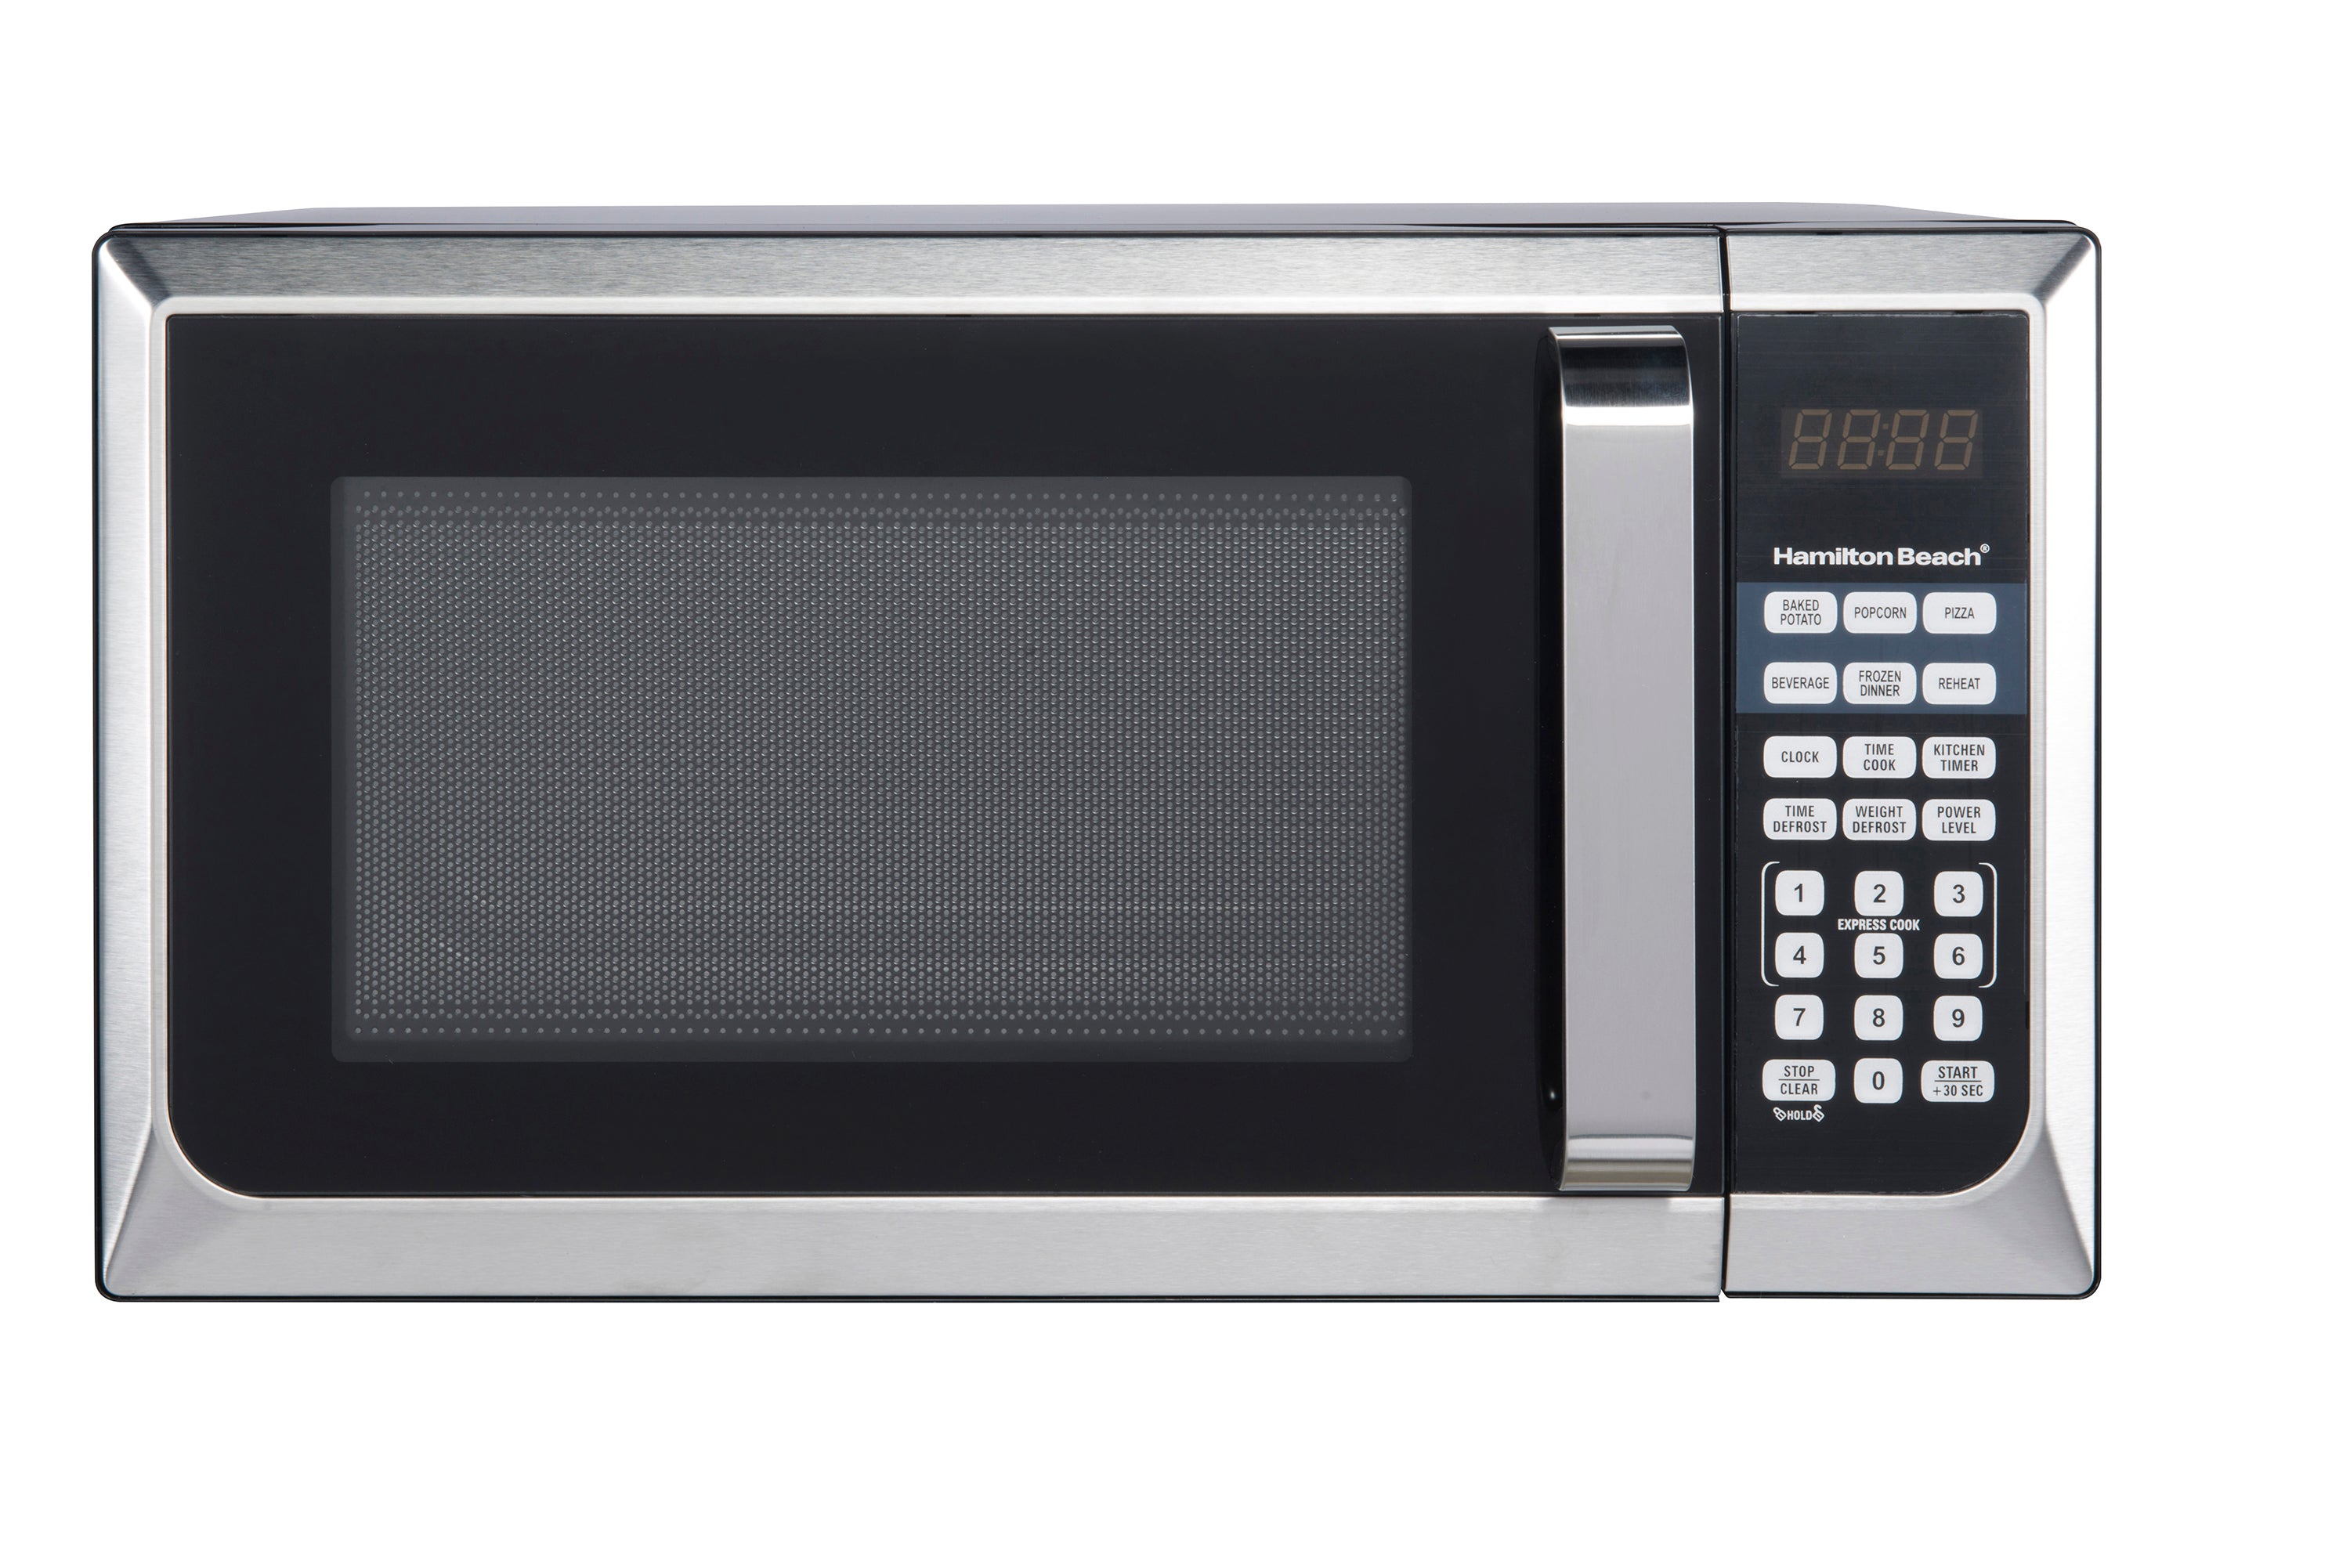 Microwave Oven 0.9 Stainless Steel Countertop Ft. Cu. Beach Hamilton 900W Air-microwave oven-AULEY